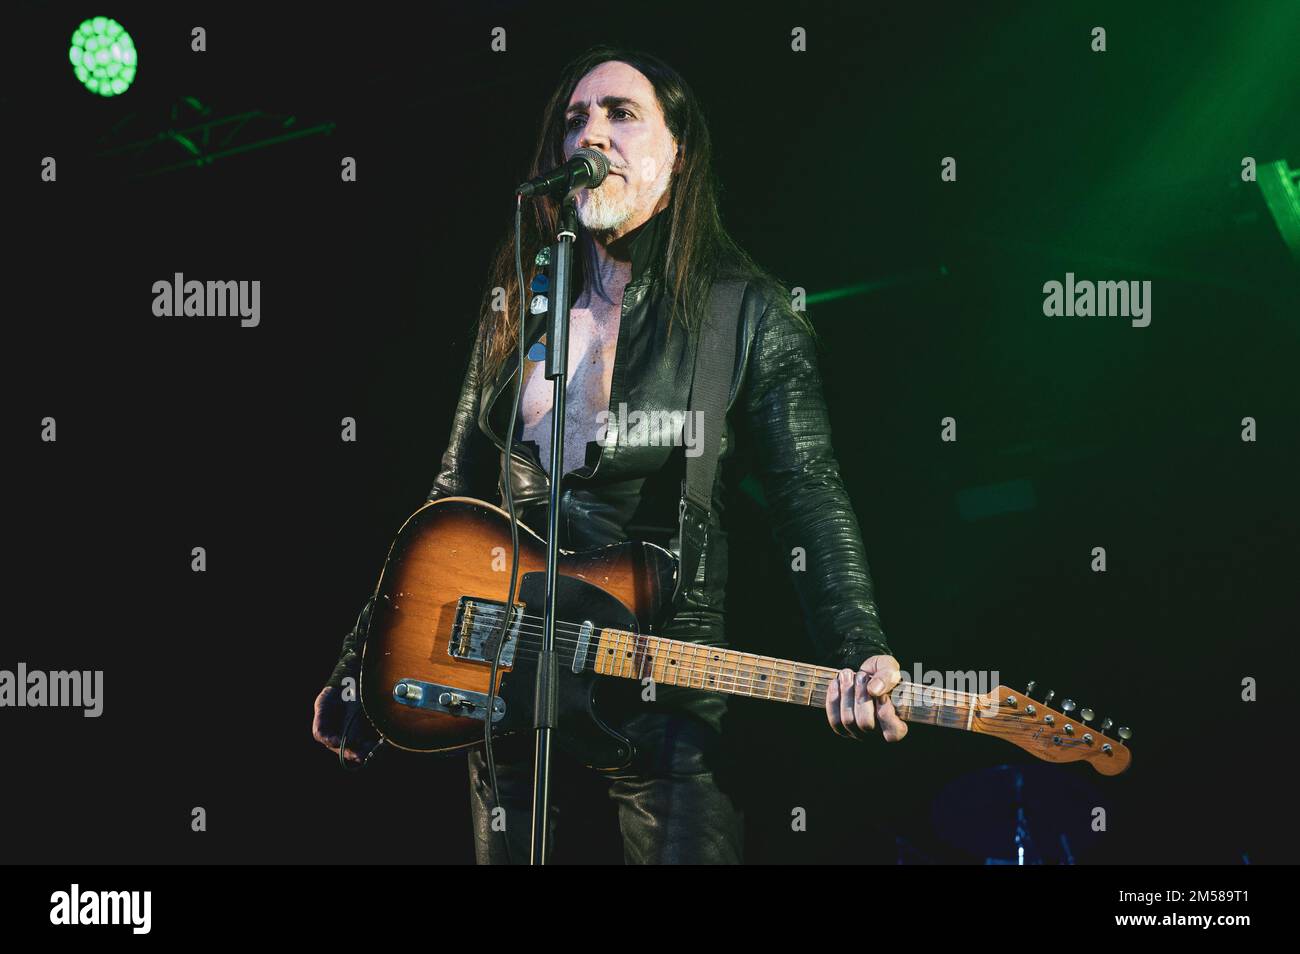 OGR, TORINO, ITALY: The Italian singer, songwriter and producer Manuel Agnelli performing live on stage for his “Ama Il Prossimo Tuo Come Te Stesso” tour concert in Torino at the Officine Grandi Riparazioni in front a sold out venue. Stock Photo